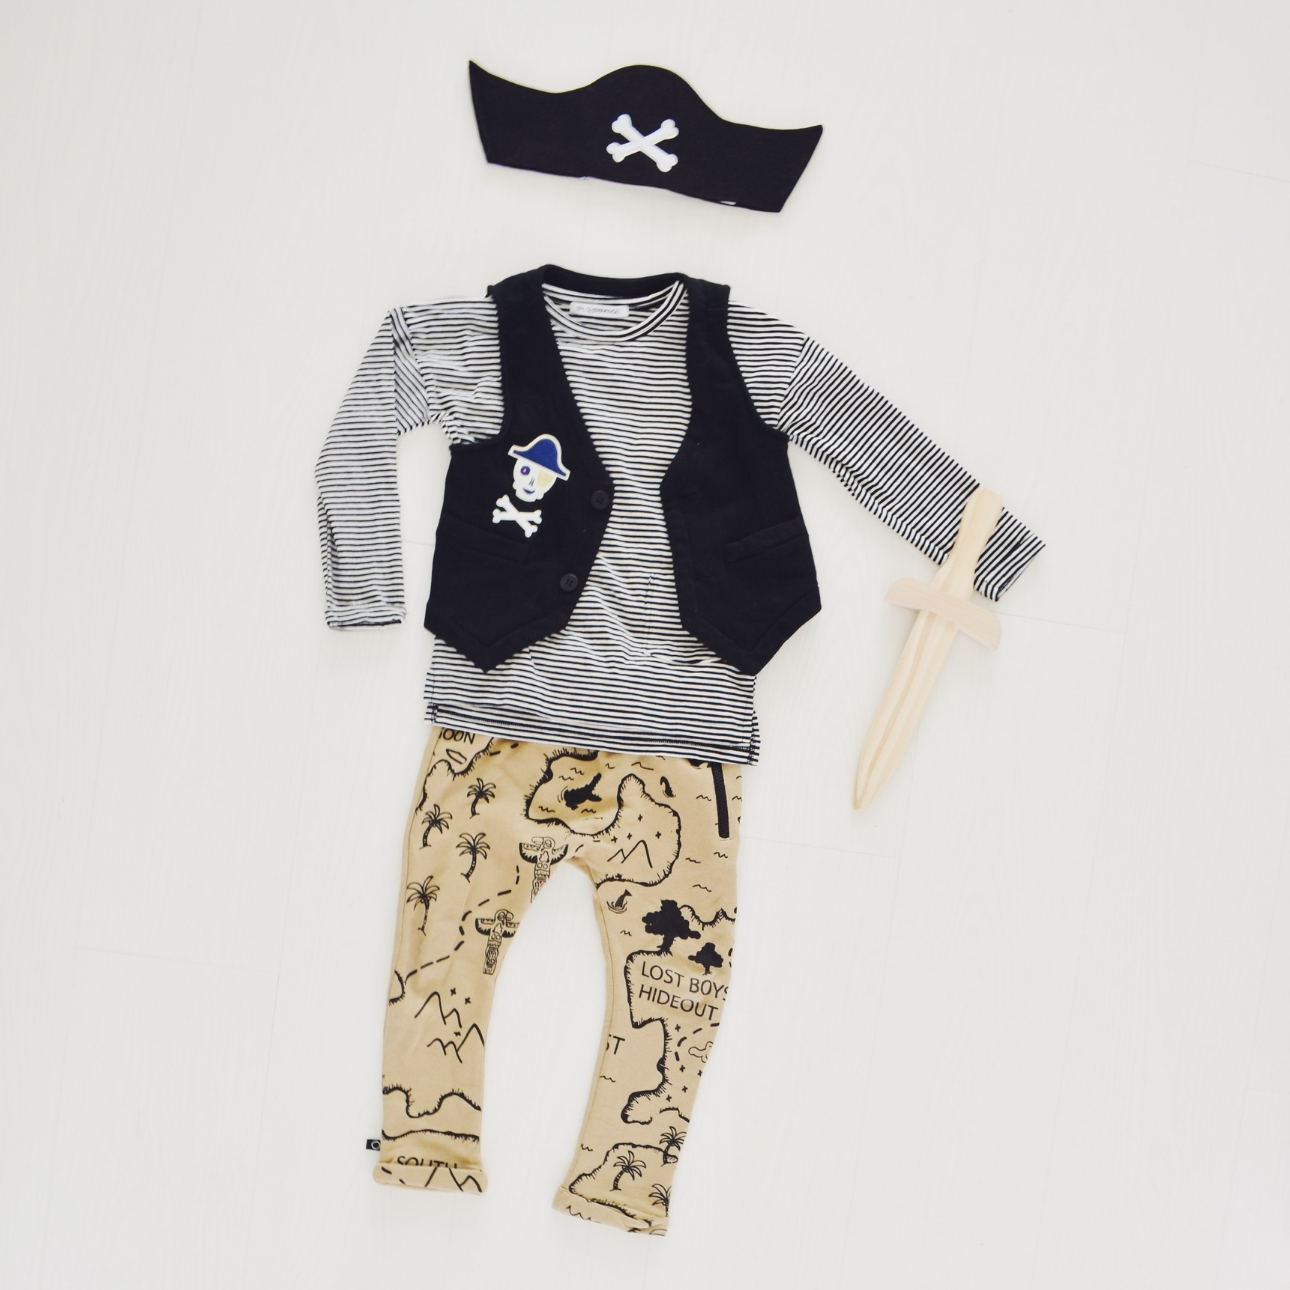 piratenfeest outfit javian